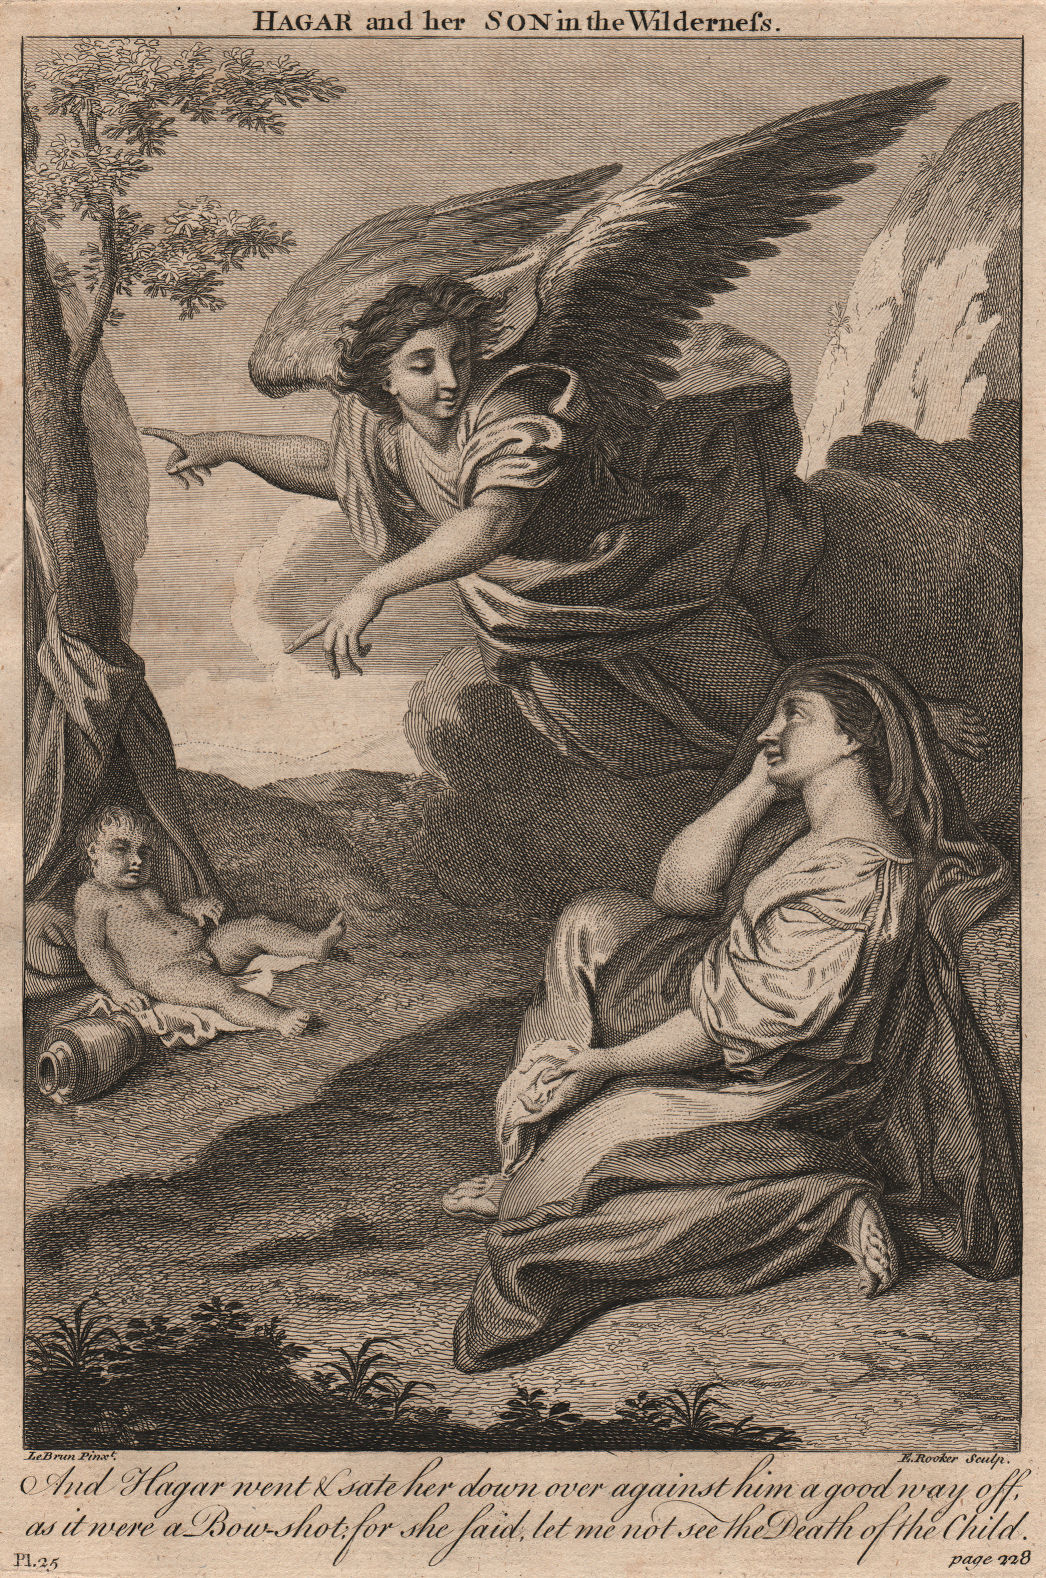 Associate Product BIBLE. Genesis 21.16 Hagar and her son in the Wilderness 1752 old print